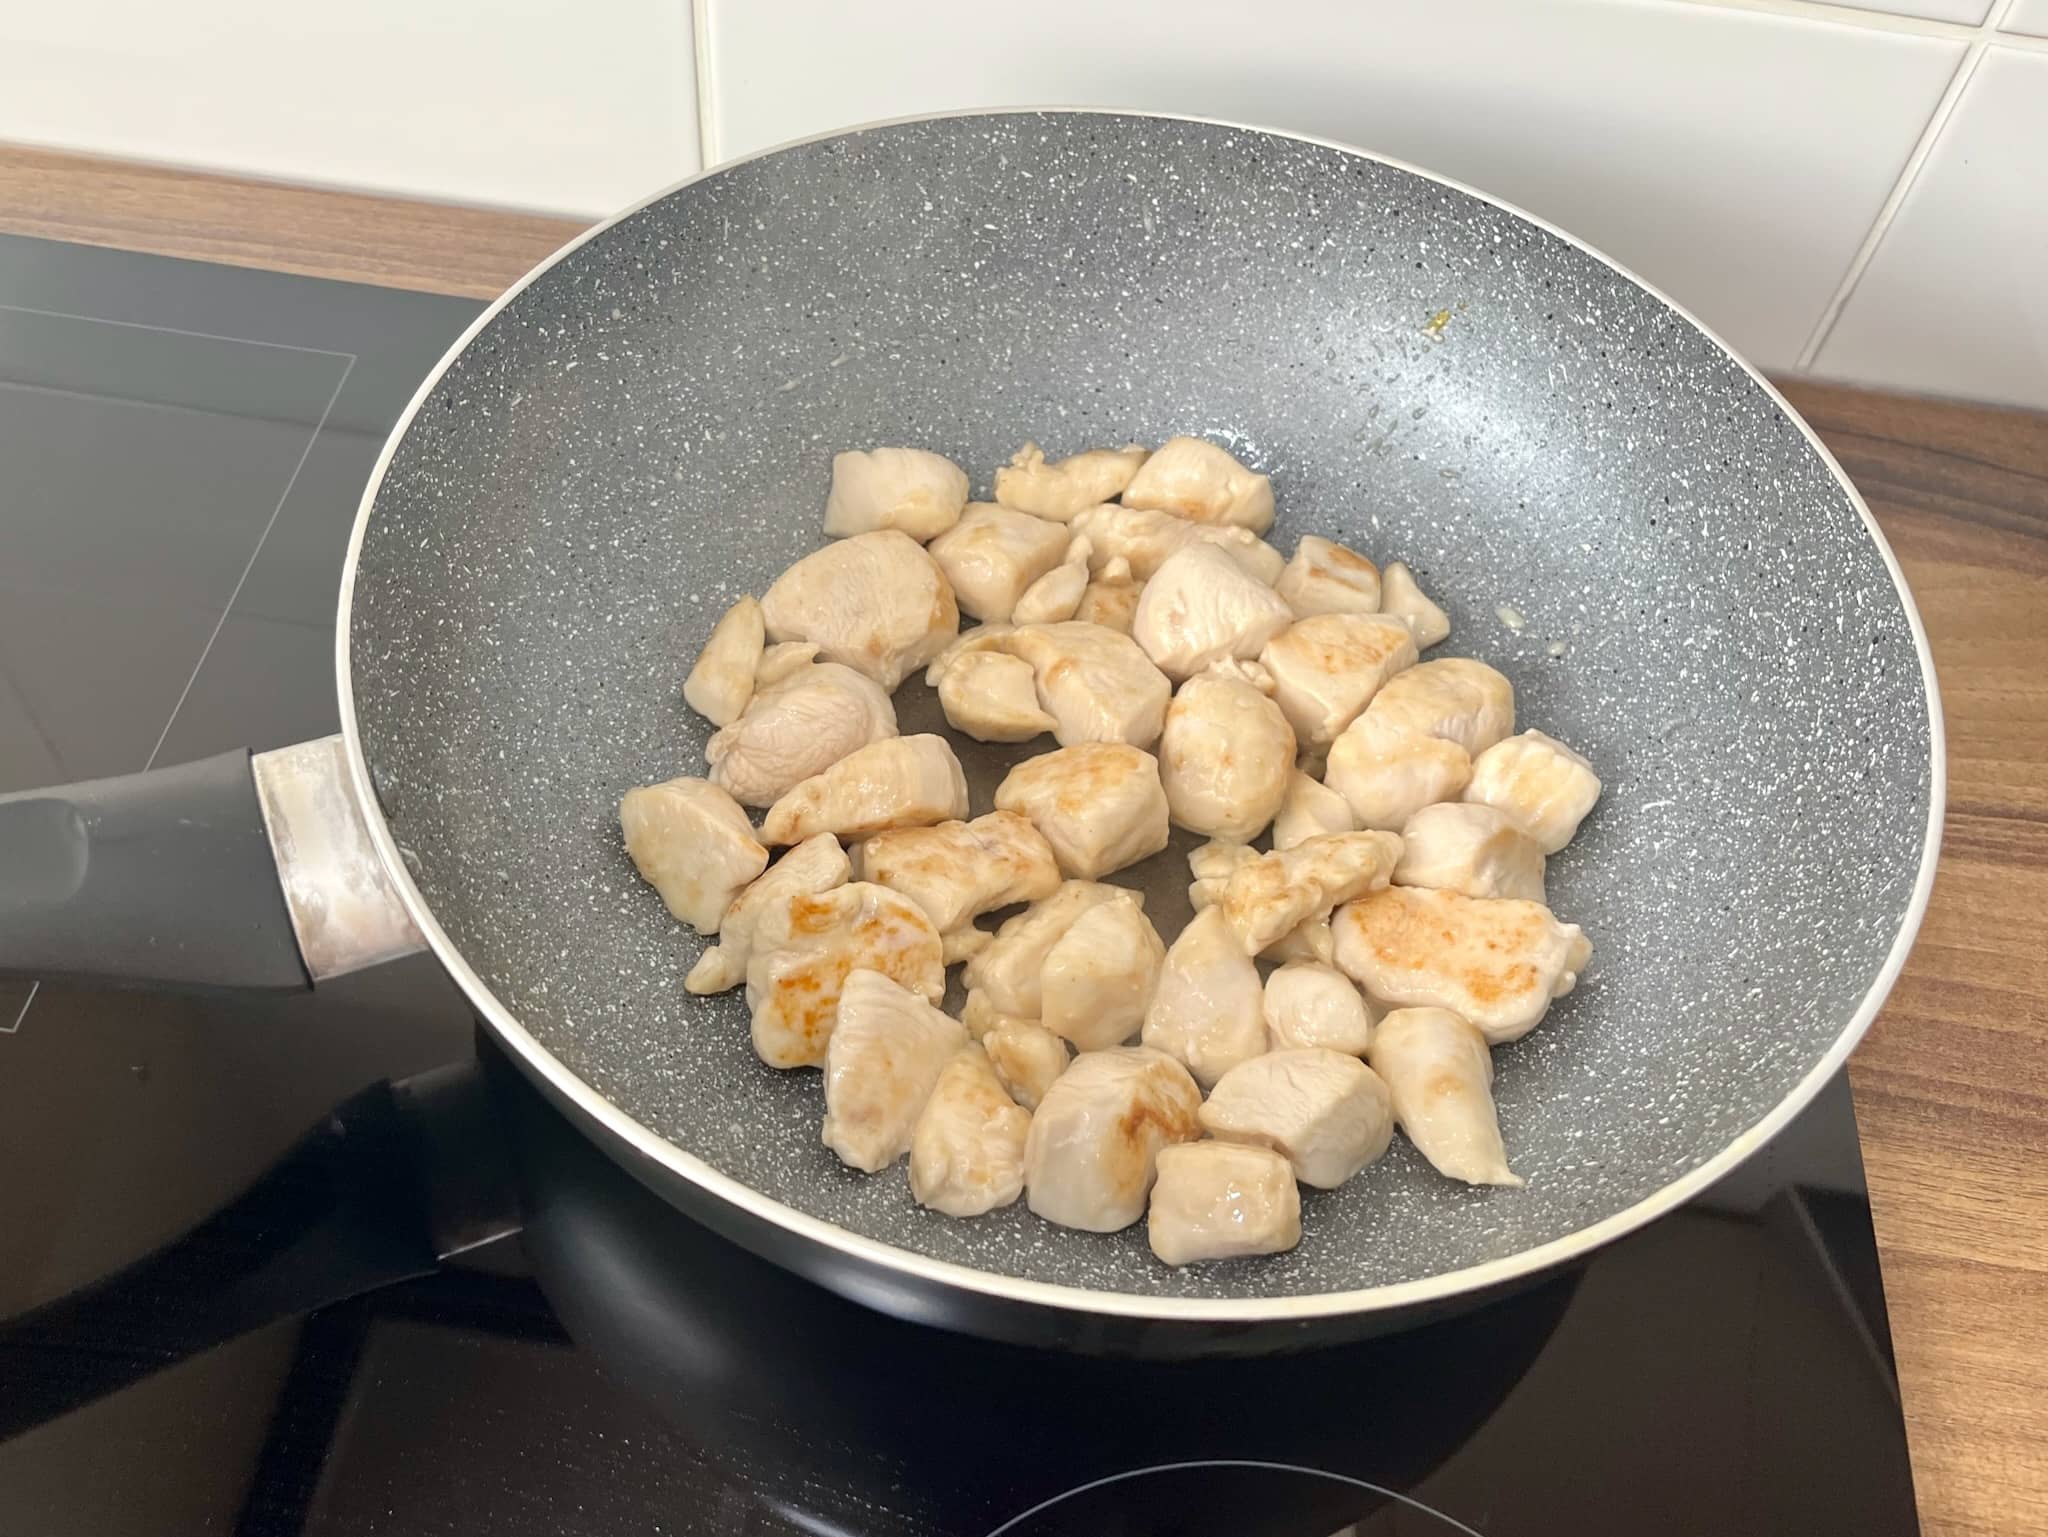 Diced chicken breast stir fry in a pan